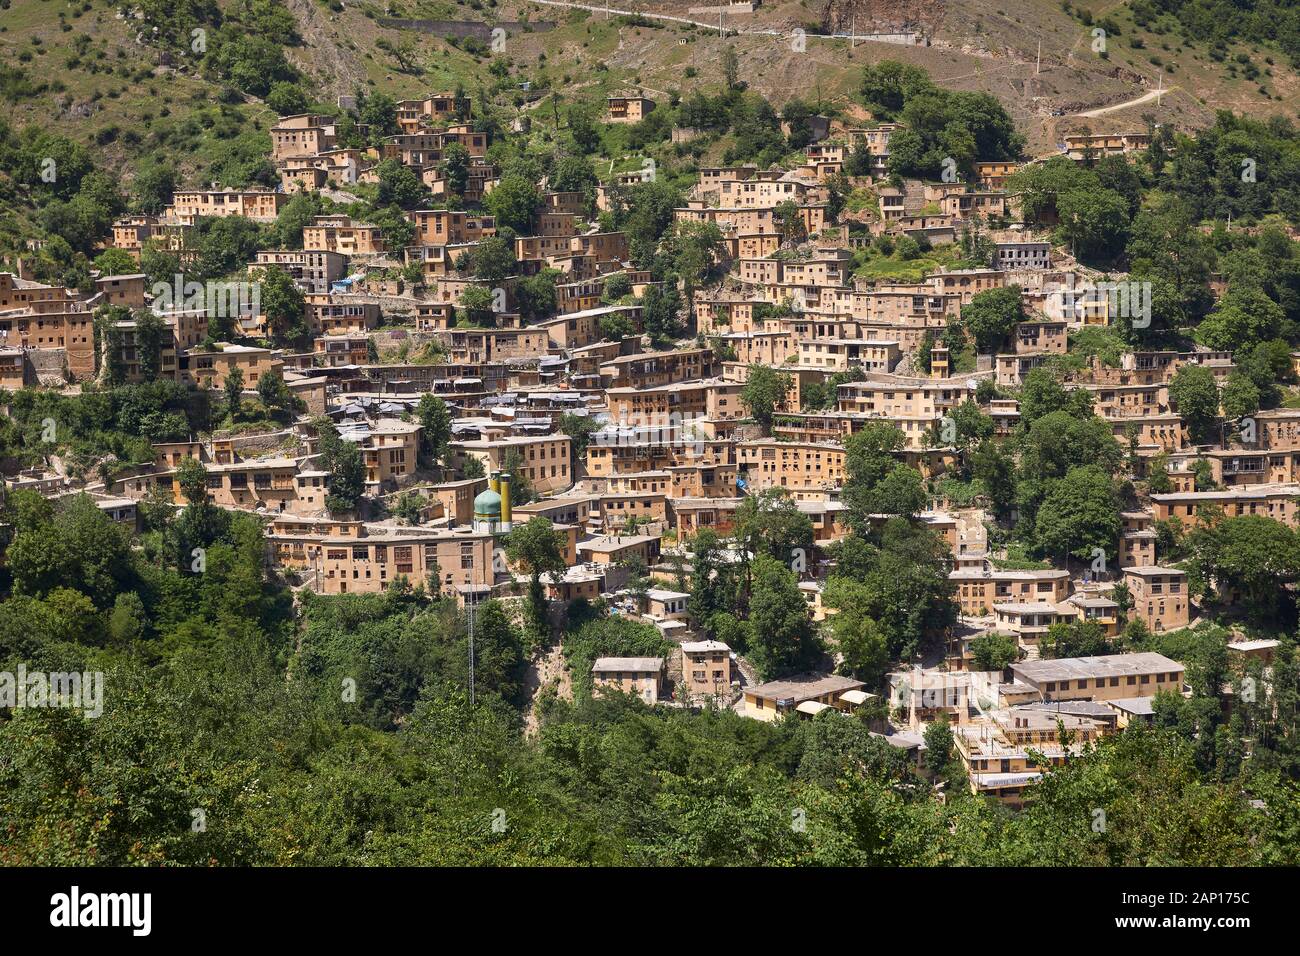 The mountain village of Masuleh in the Elburs Mountains in northern Iran, taken on May 28, 2017. The village is built like a terrace into the very steep slope. The roofs are usually flat or only slightly inclined and often also serve as footpaths for the upper house level above. Due to the unusual architecture of the houses, the place is a tourist attraction. | usage worldwide Stock Photo